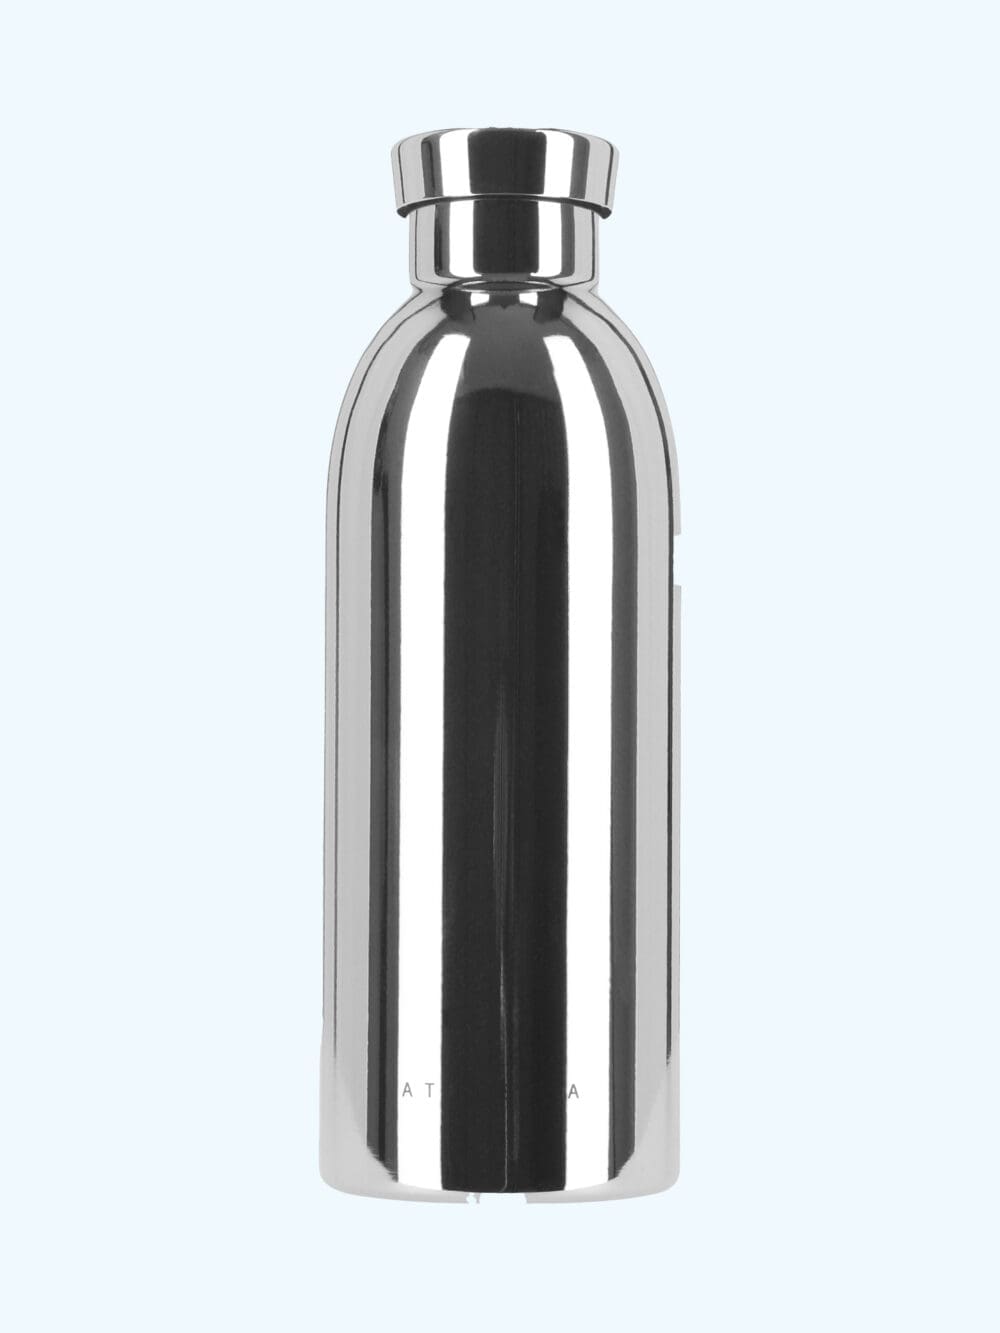 athlecia-zizo-stainless-steel-water-bottle-